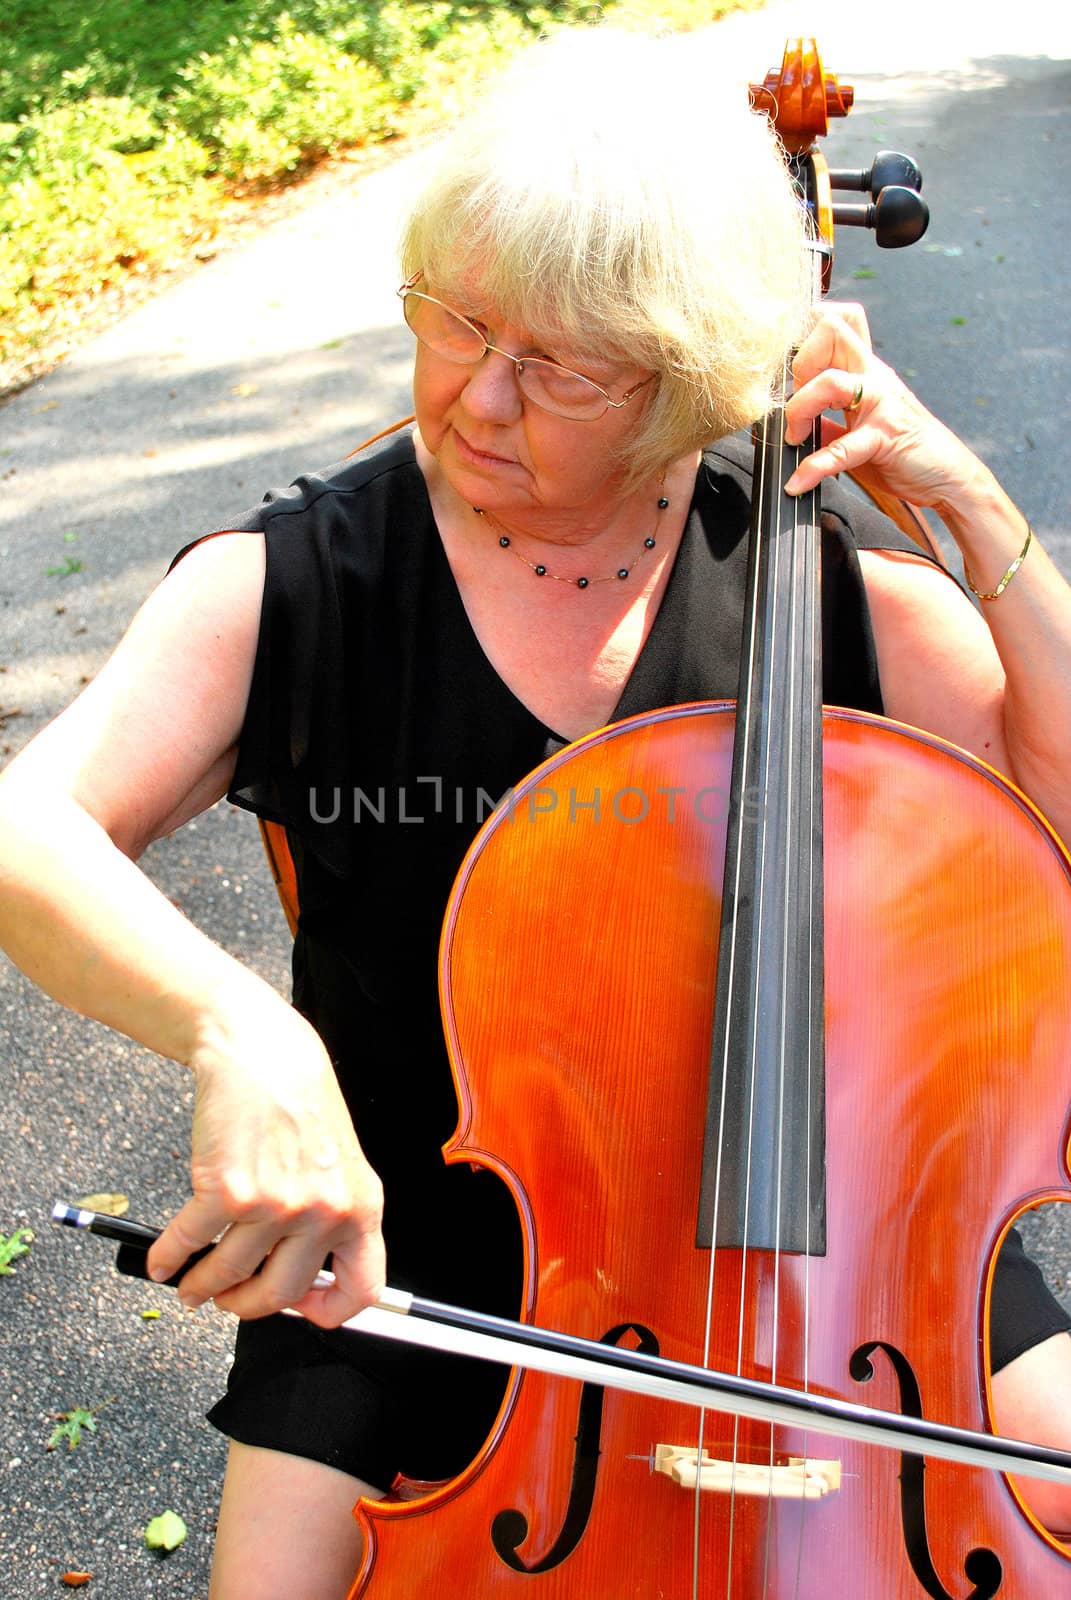 Female cellist posing with her cello outside.